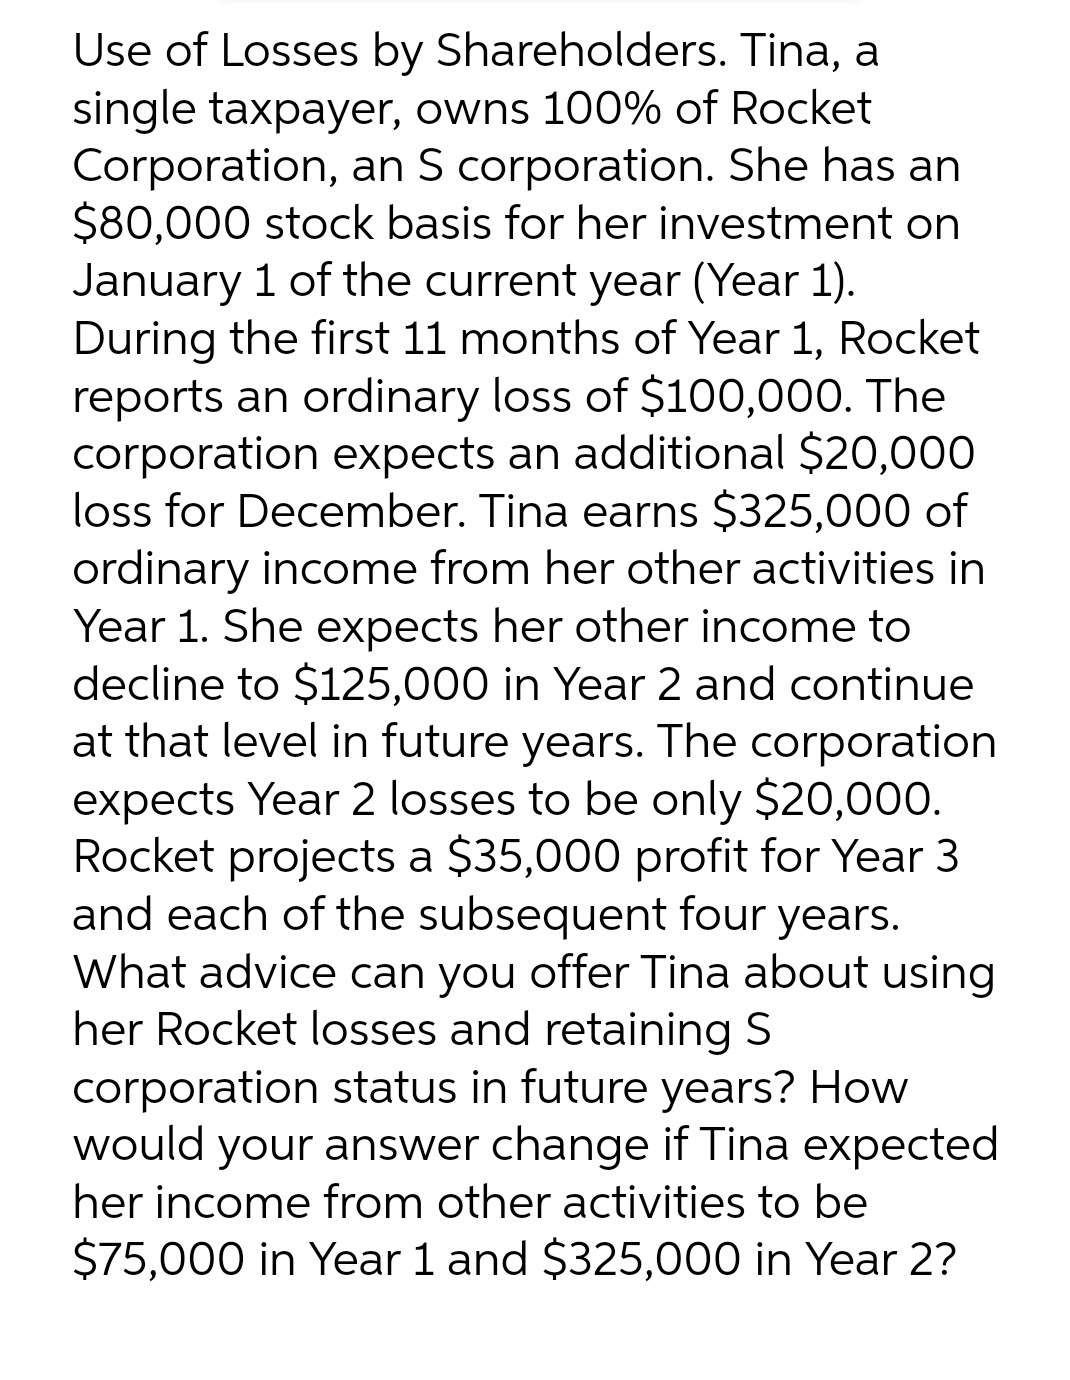 Use of Losses by Shareholders. Tina, a
single taxpayer, owns 100% of Rocket
Corporation, an S corporation. She has an
$80,000 stock basis for her investment on
January 1 of the current year (Year 1).
During the first 11 months of Year 1, Rocket
reports an ordinary loss of $100,000. The
corporation expects an additional $20,000
loss for December. Tina earns $325,000 of
ordinary income from her other activities in
Year 1. She expects her other income to
decline to $125,000 in Year 2 and continue
at that level in future years. The corporation
expects Year 2 losses to be only $20,000.
Rocket projects a $35,000 profit for Year 3
and each of the subsequent four years.
What advice can you offer Tina about using
her Rocket losses and retaining S
corporation status in future years? How
would your answer change if Tina expected
her income from other activities to be
$75,000 in Year 1 and $325,000 in Year 2?
